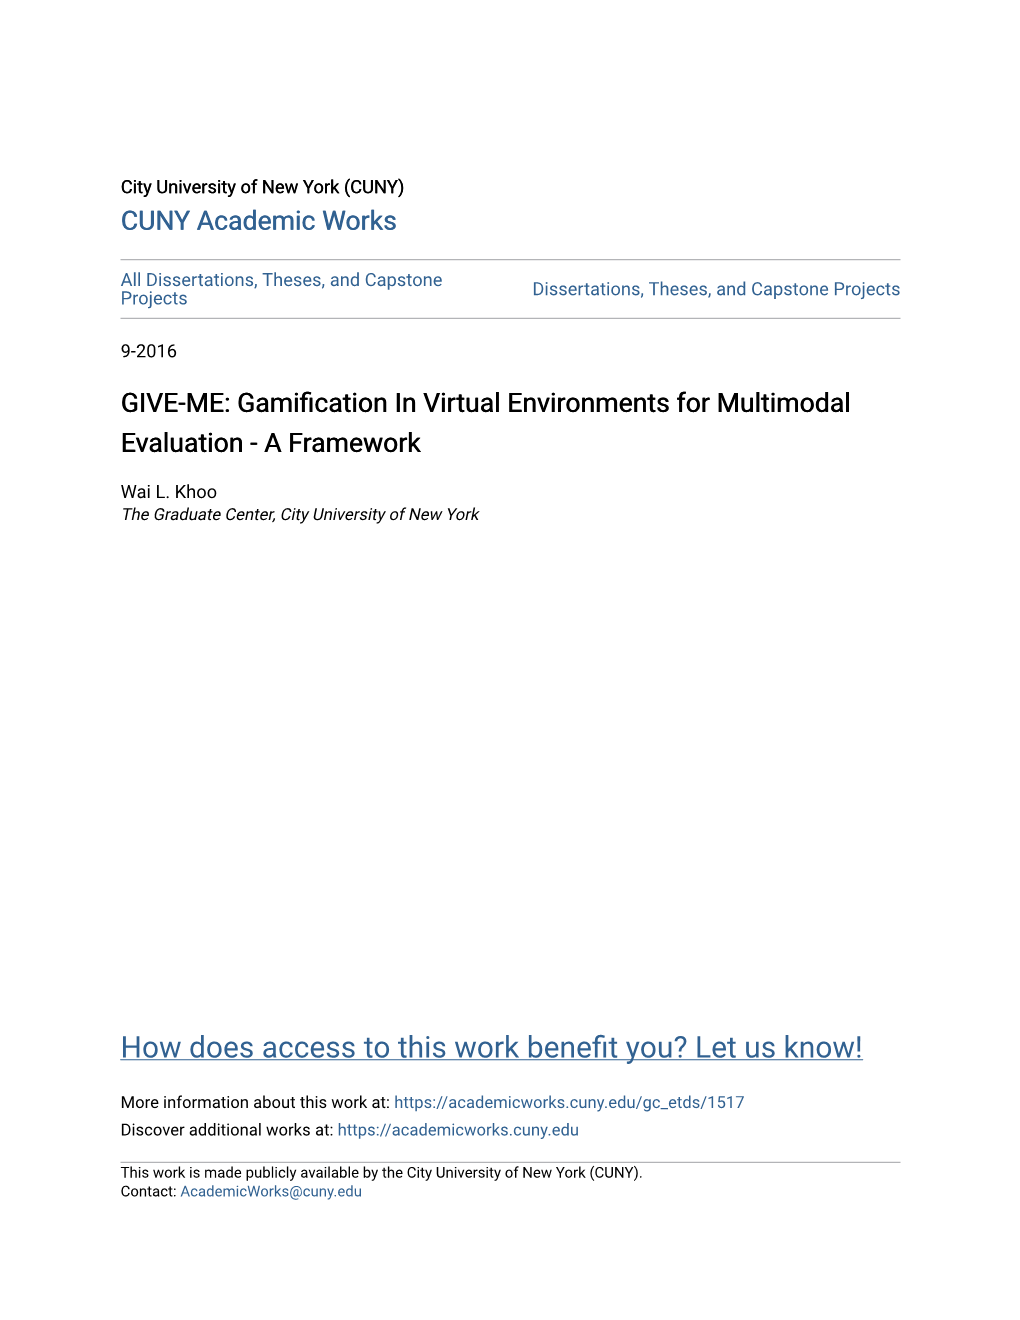 Gamification in Virtual Environments for Multimodal Evaluation - a Framework